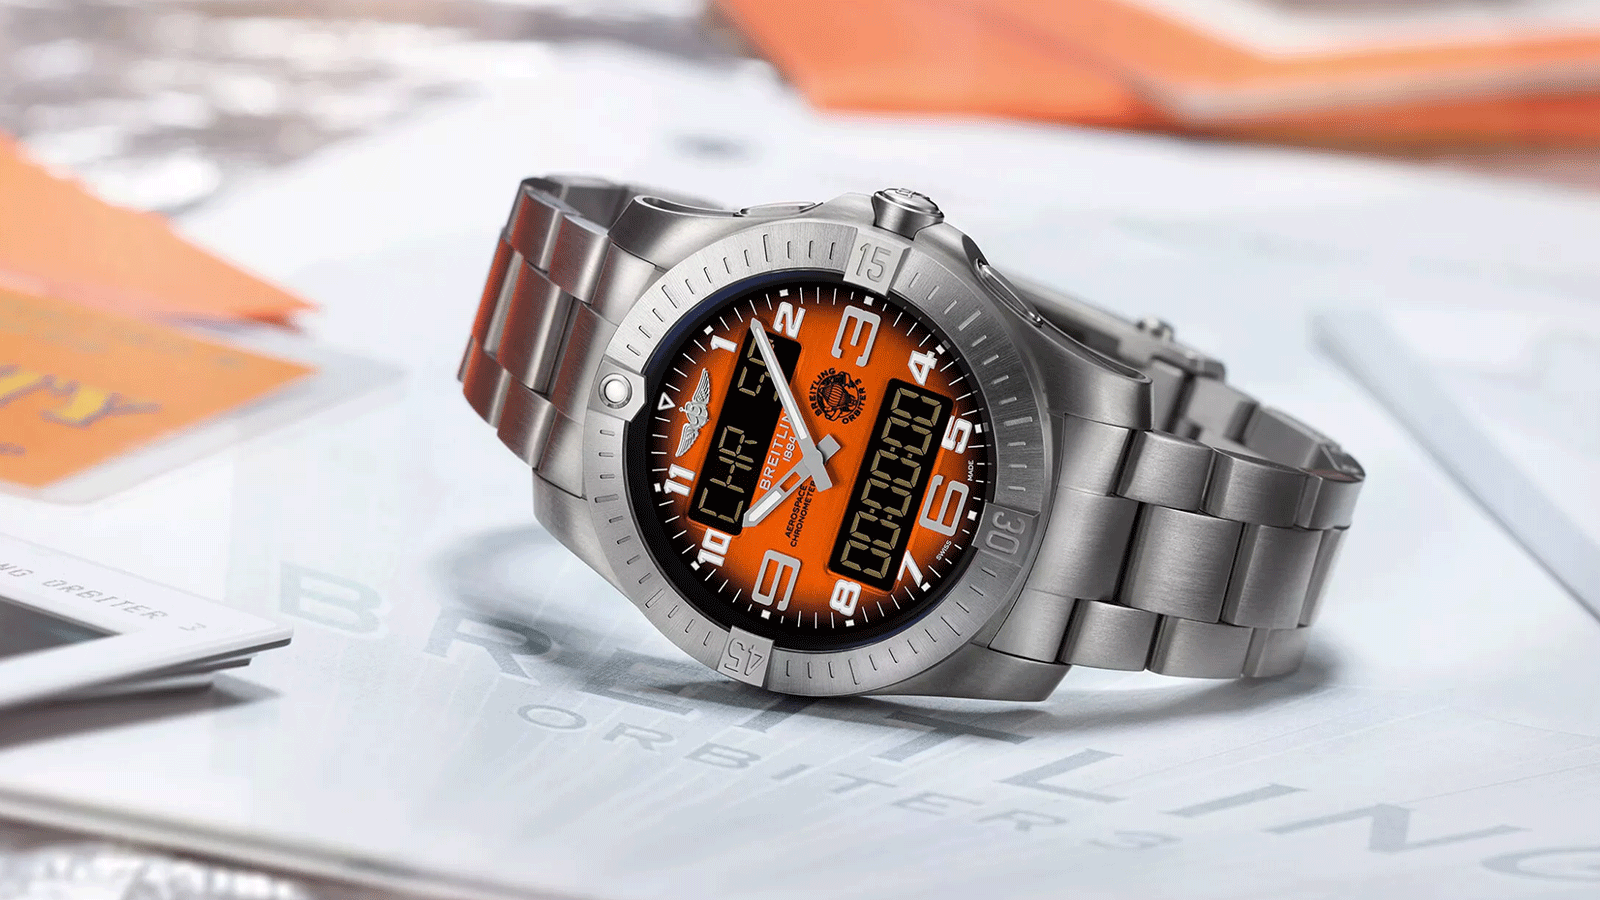 Celebrating this landmark on its 25th anniversary, Breitling, the sponsor of the groundbreaking voyage, unveils the Aerospace B70 Orbiter. The timepiece is a tribute to an adventure that expanded the horizons of human achievement—and, best of all, each watch contains a piece of the original balloon.